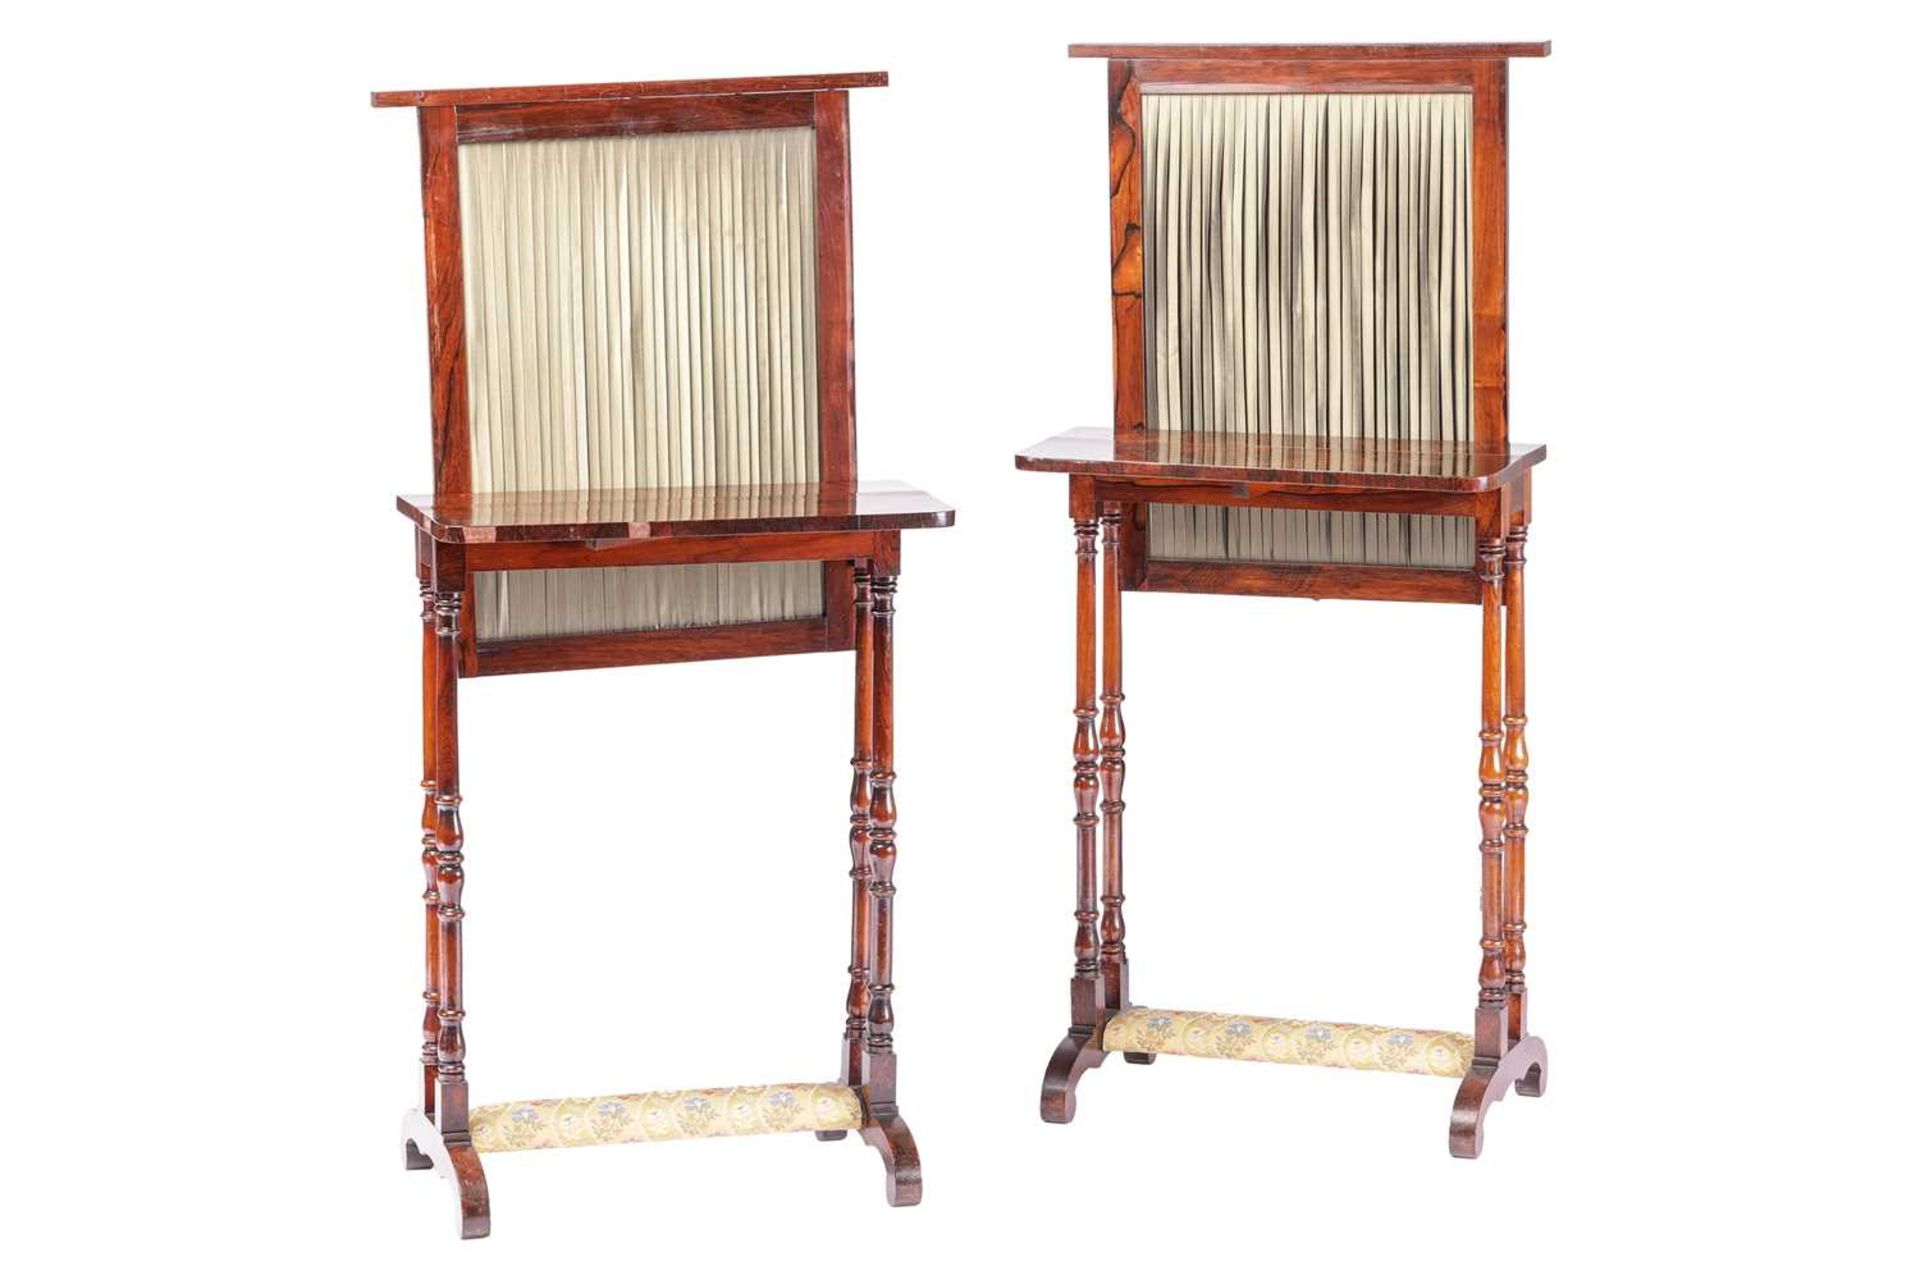 A pair of early 19th-century figured rosewood Prie Dieus, the rise and fall face screens with - Image 3 of 4